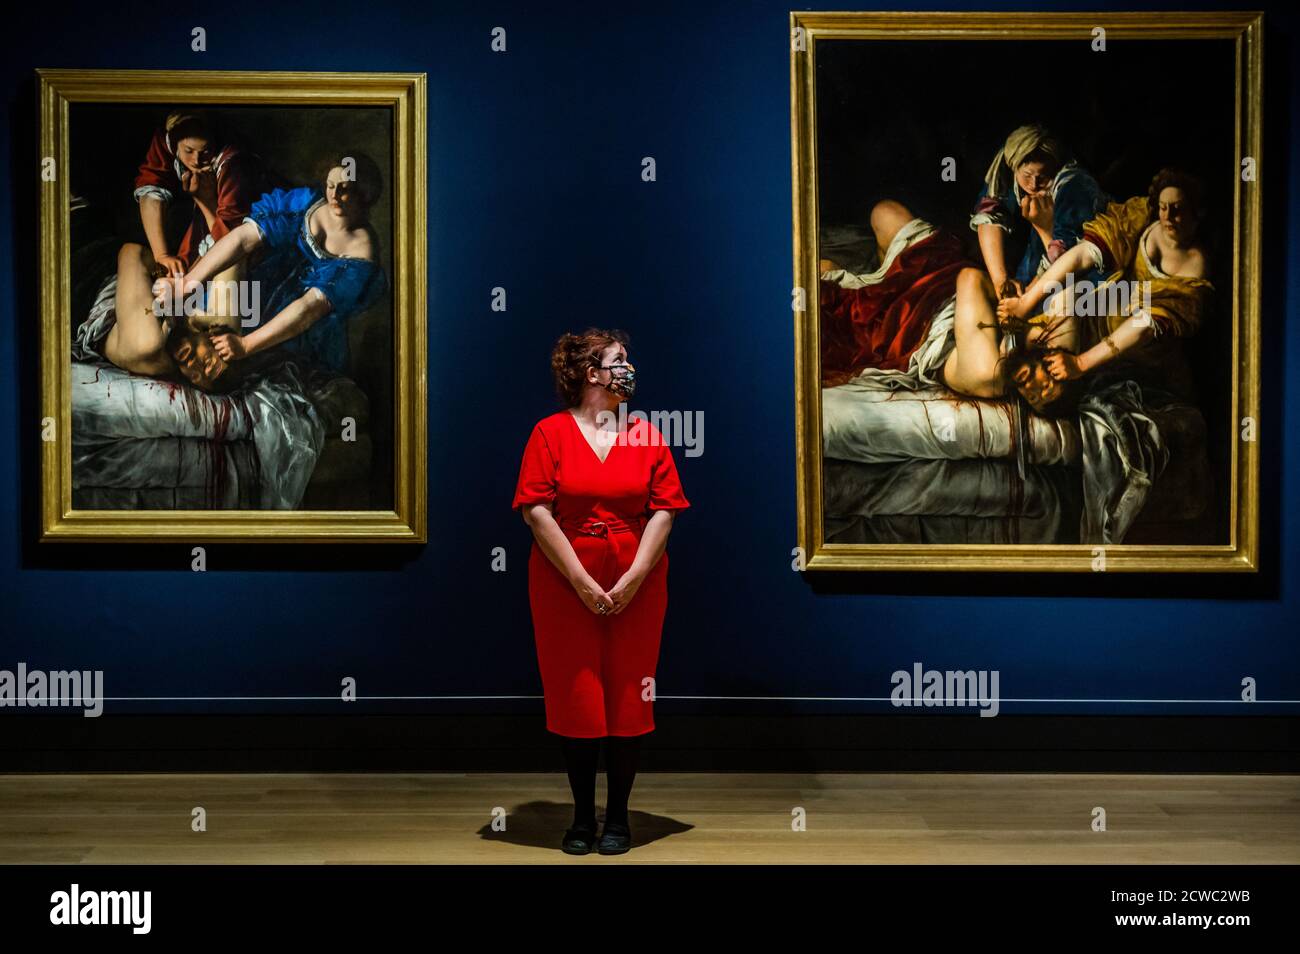 London, UK. 26th Sep 2020. Judith beheading Holofernes about 1612-13 and about 1613-14 - Artemisia: For the first time in the UK, a major monographic exhibition of the work of Artemisia Gentileschi (1593-1654 or later), opens at the National Gallery in October 2020. The inspiration is the acquisition, in 2018, of Gentileschi's Self Portrait as Saint Catherine of Alexandria (about 1615-17), the first painting by the artist to enter a UK public collection. Credit: Guy Bell/Alamy Live News Stock Photo